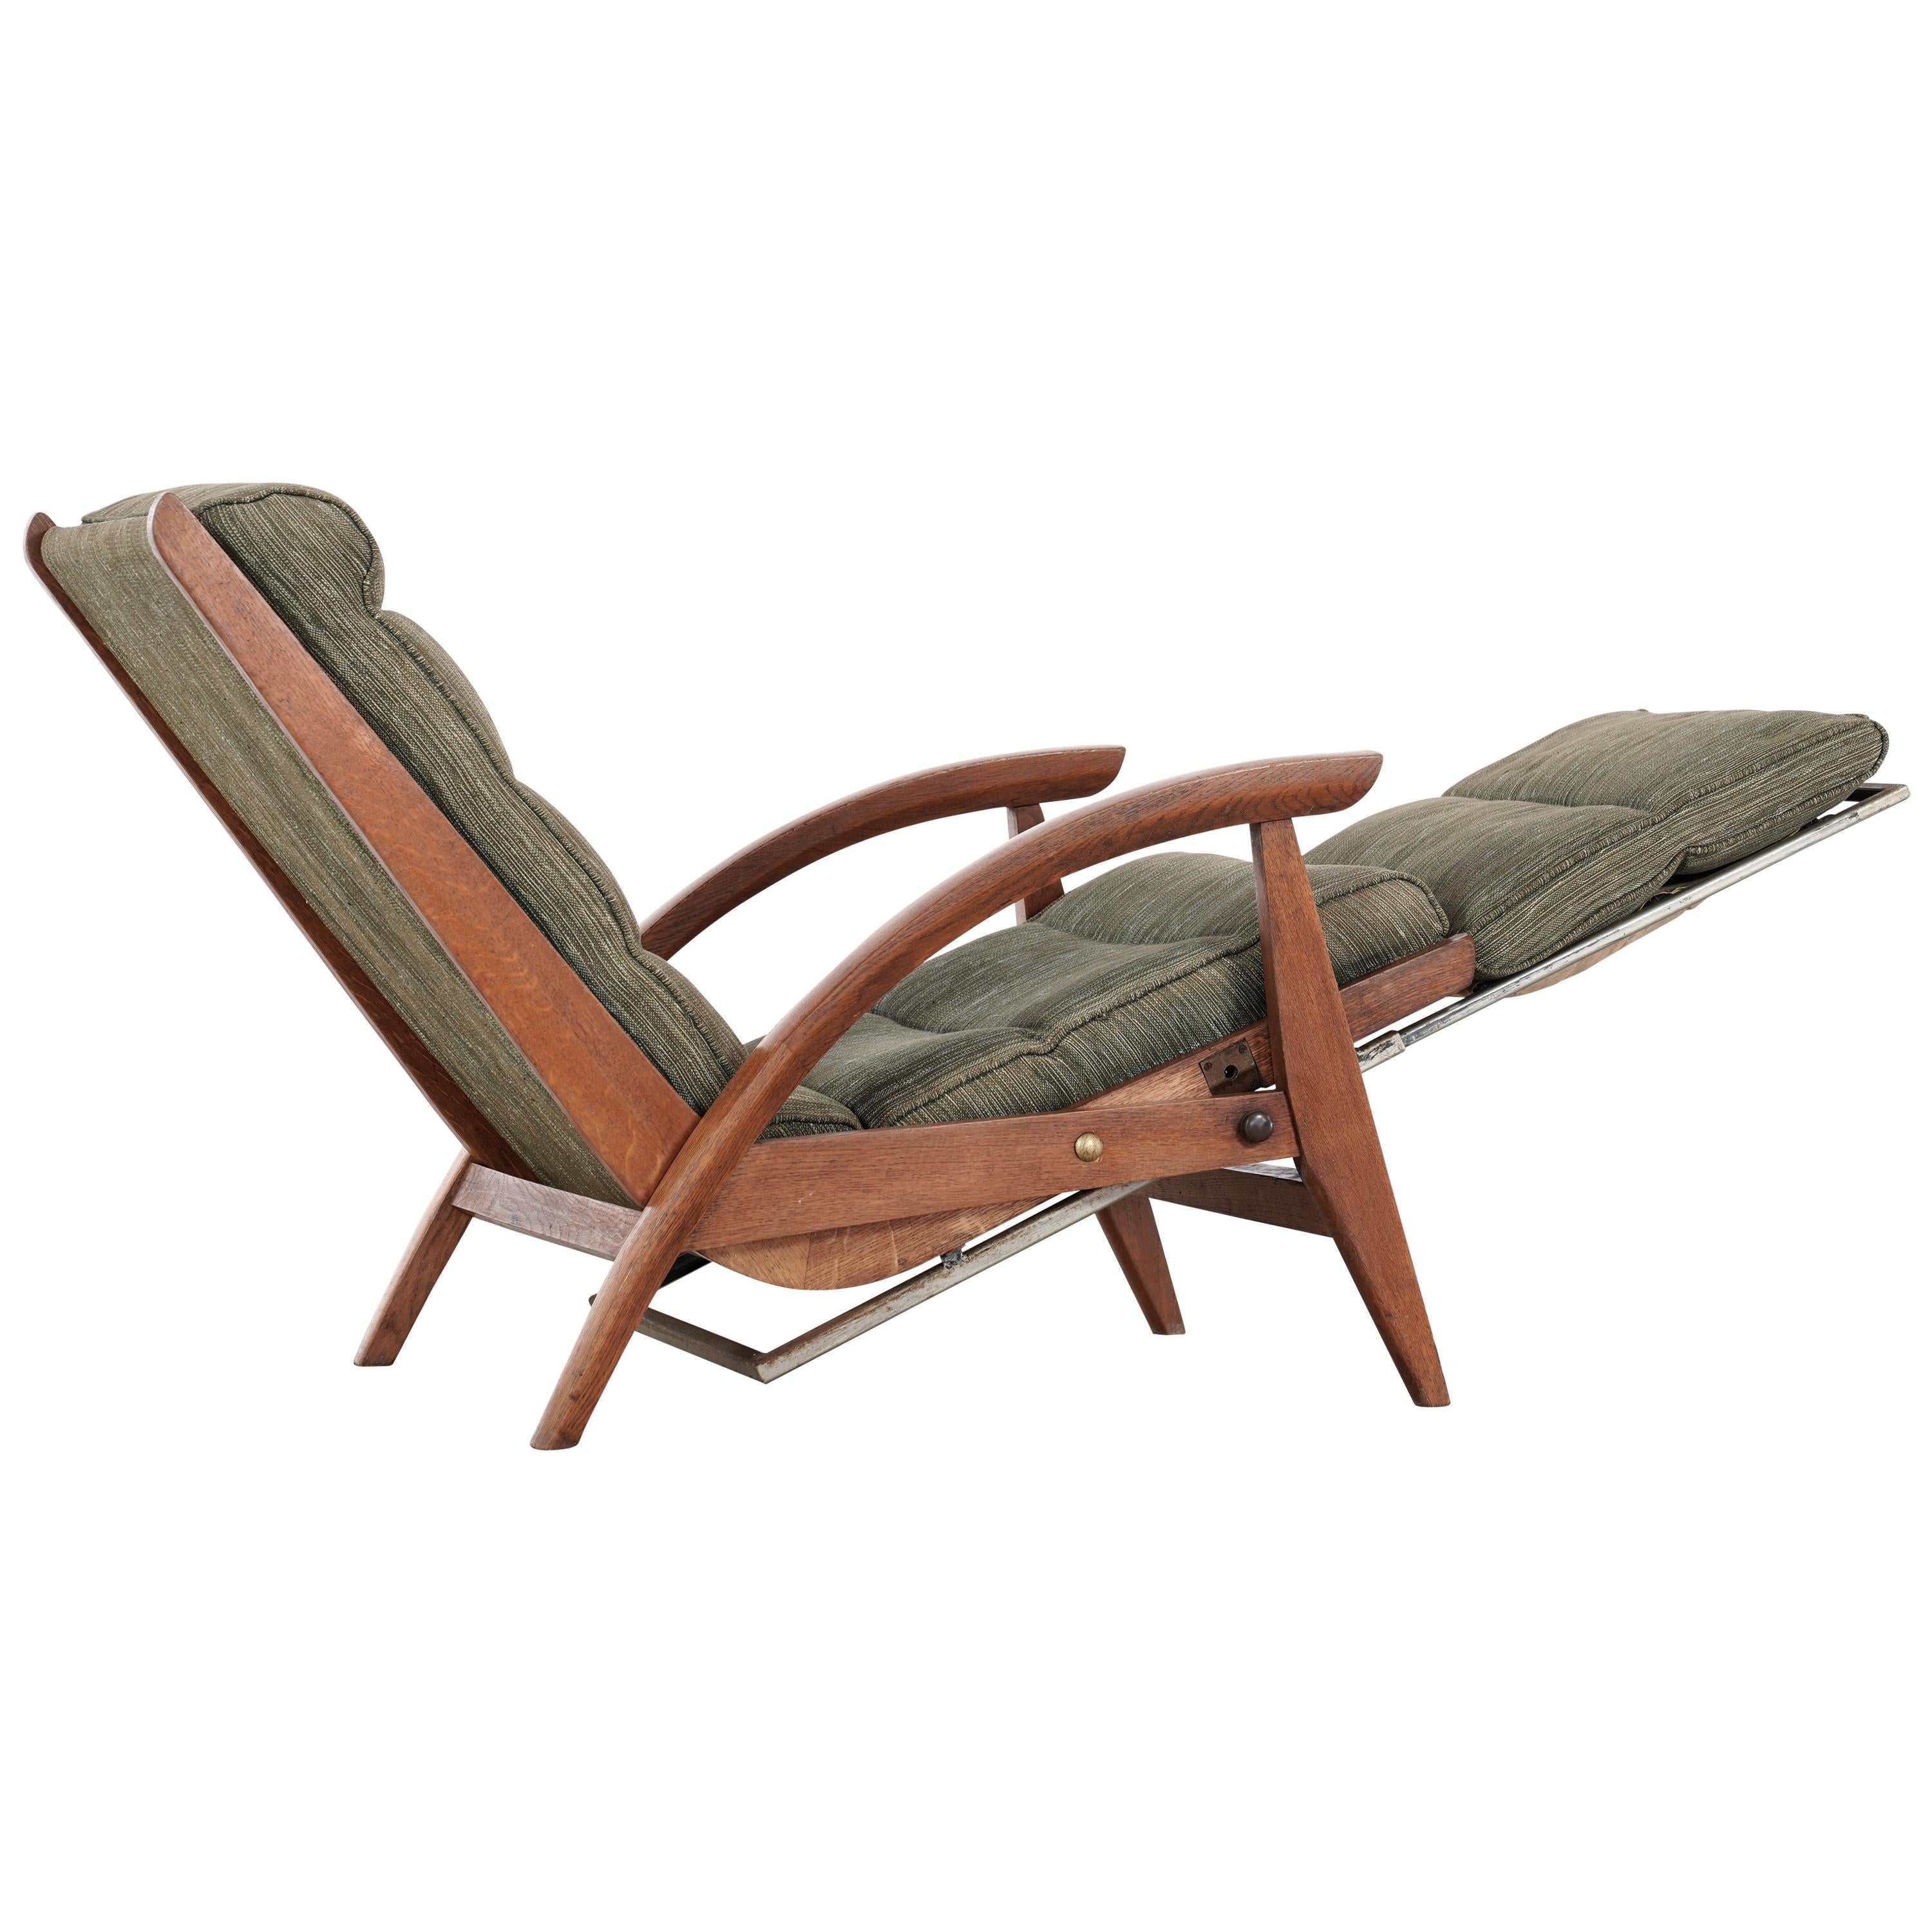 Guy Besnard FS 134 Reclining Lounge Chair, 1954 for Free Span, France Prouvé